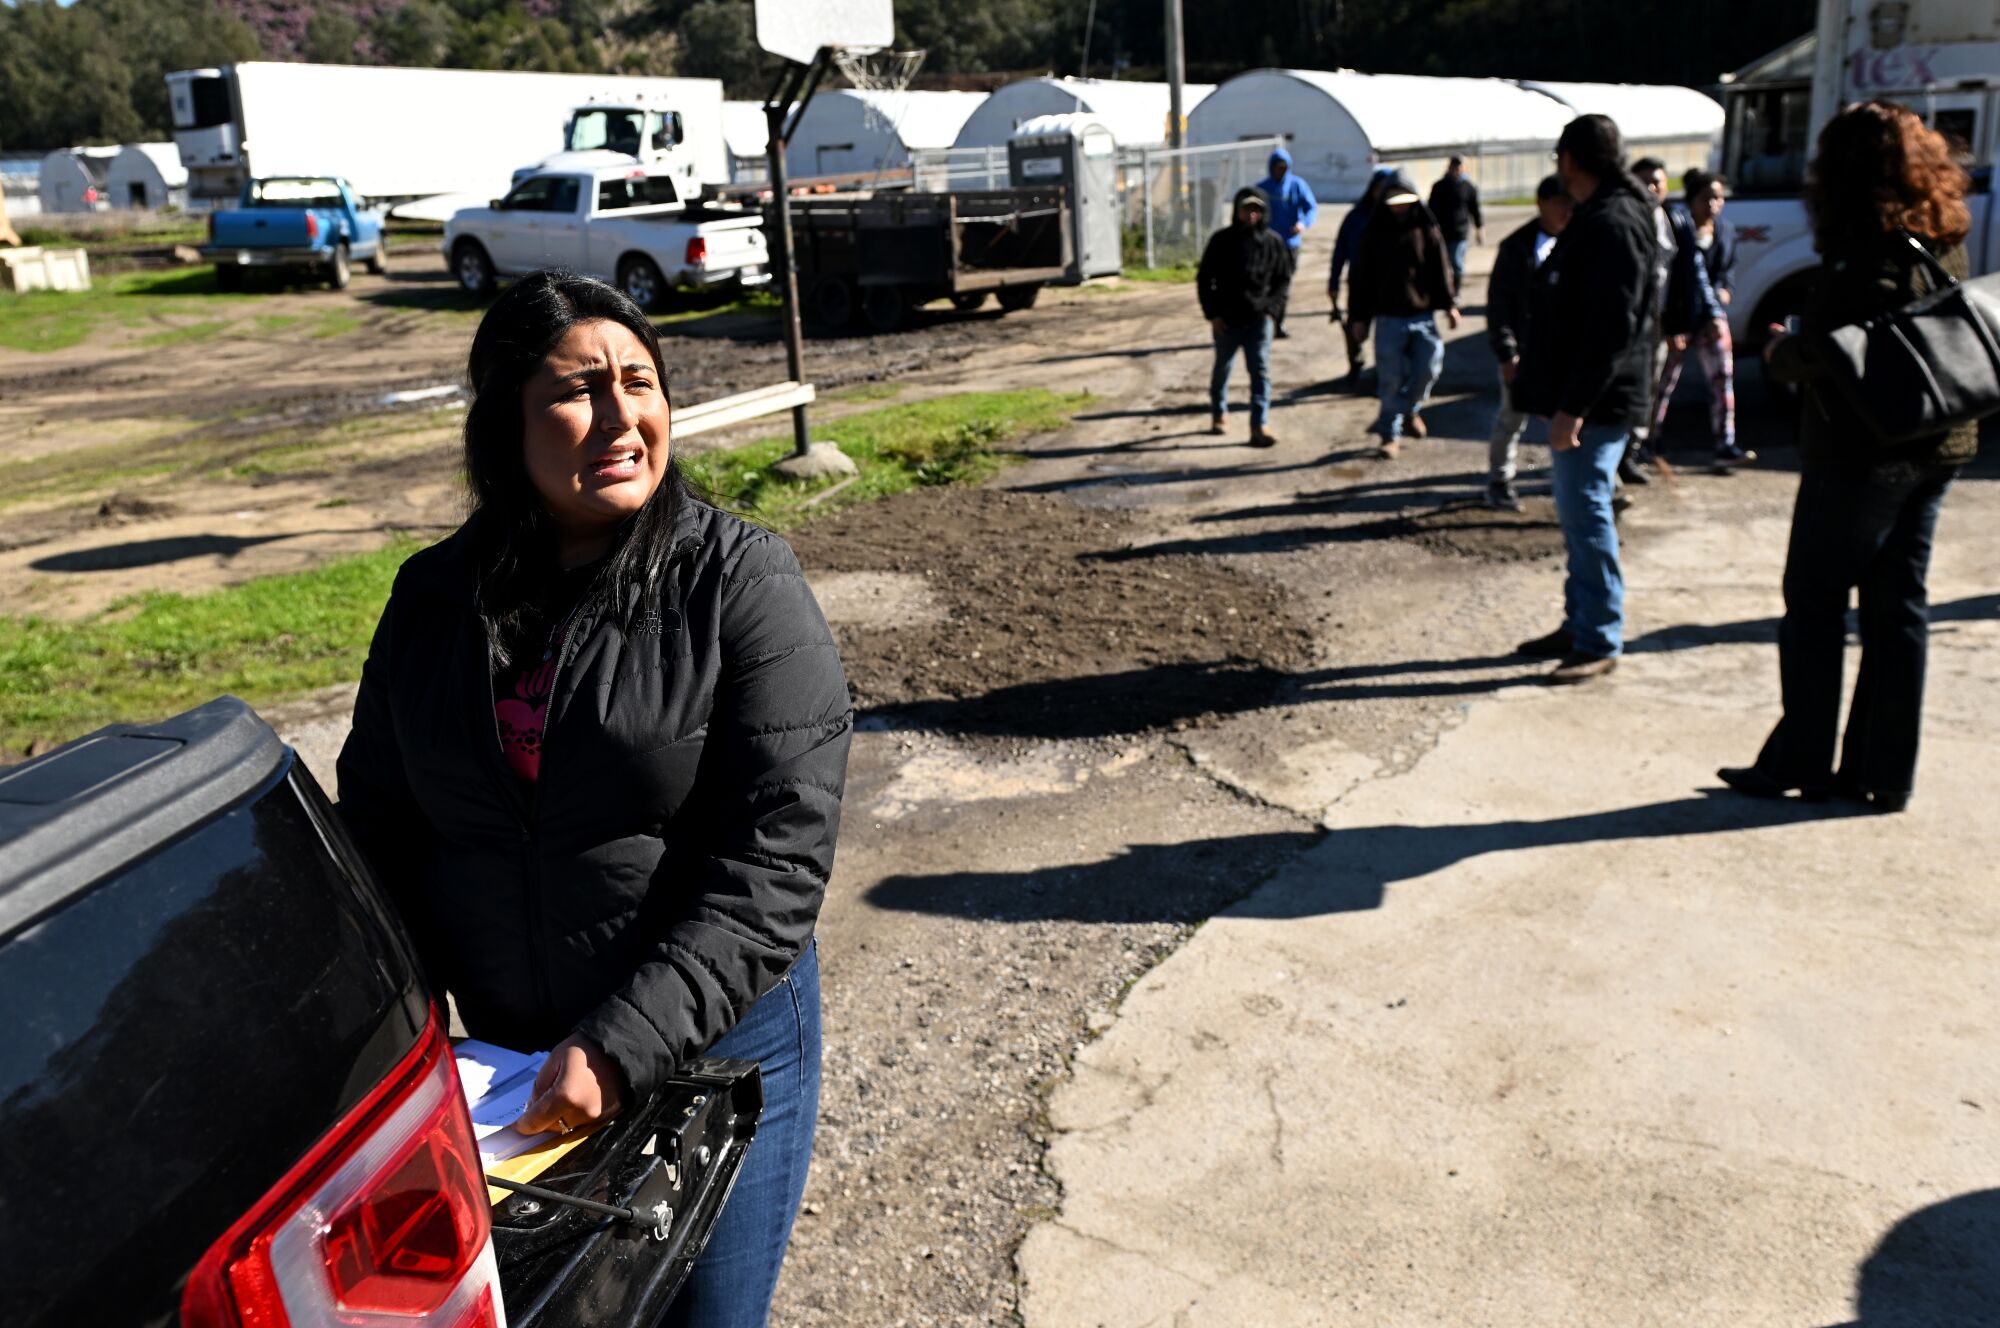 A woman stands at the open tailgate of a pickup as workers wait.